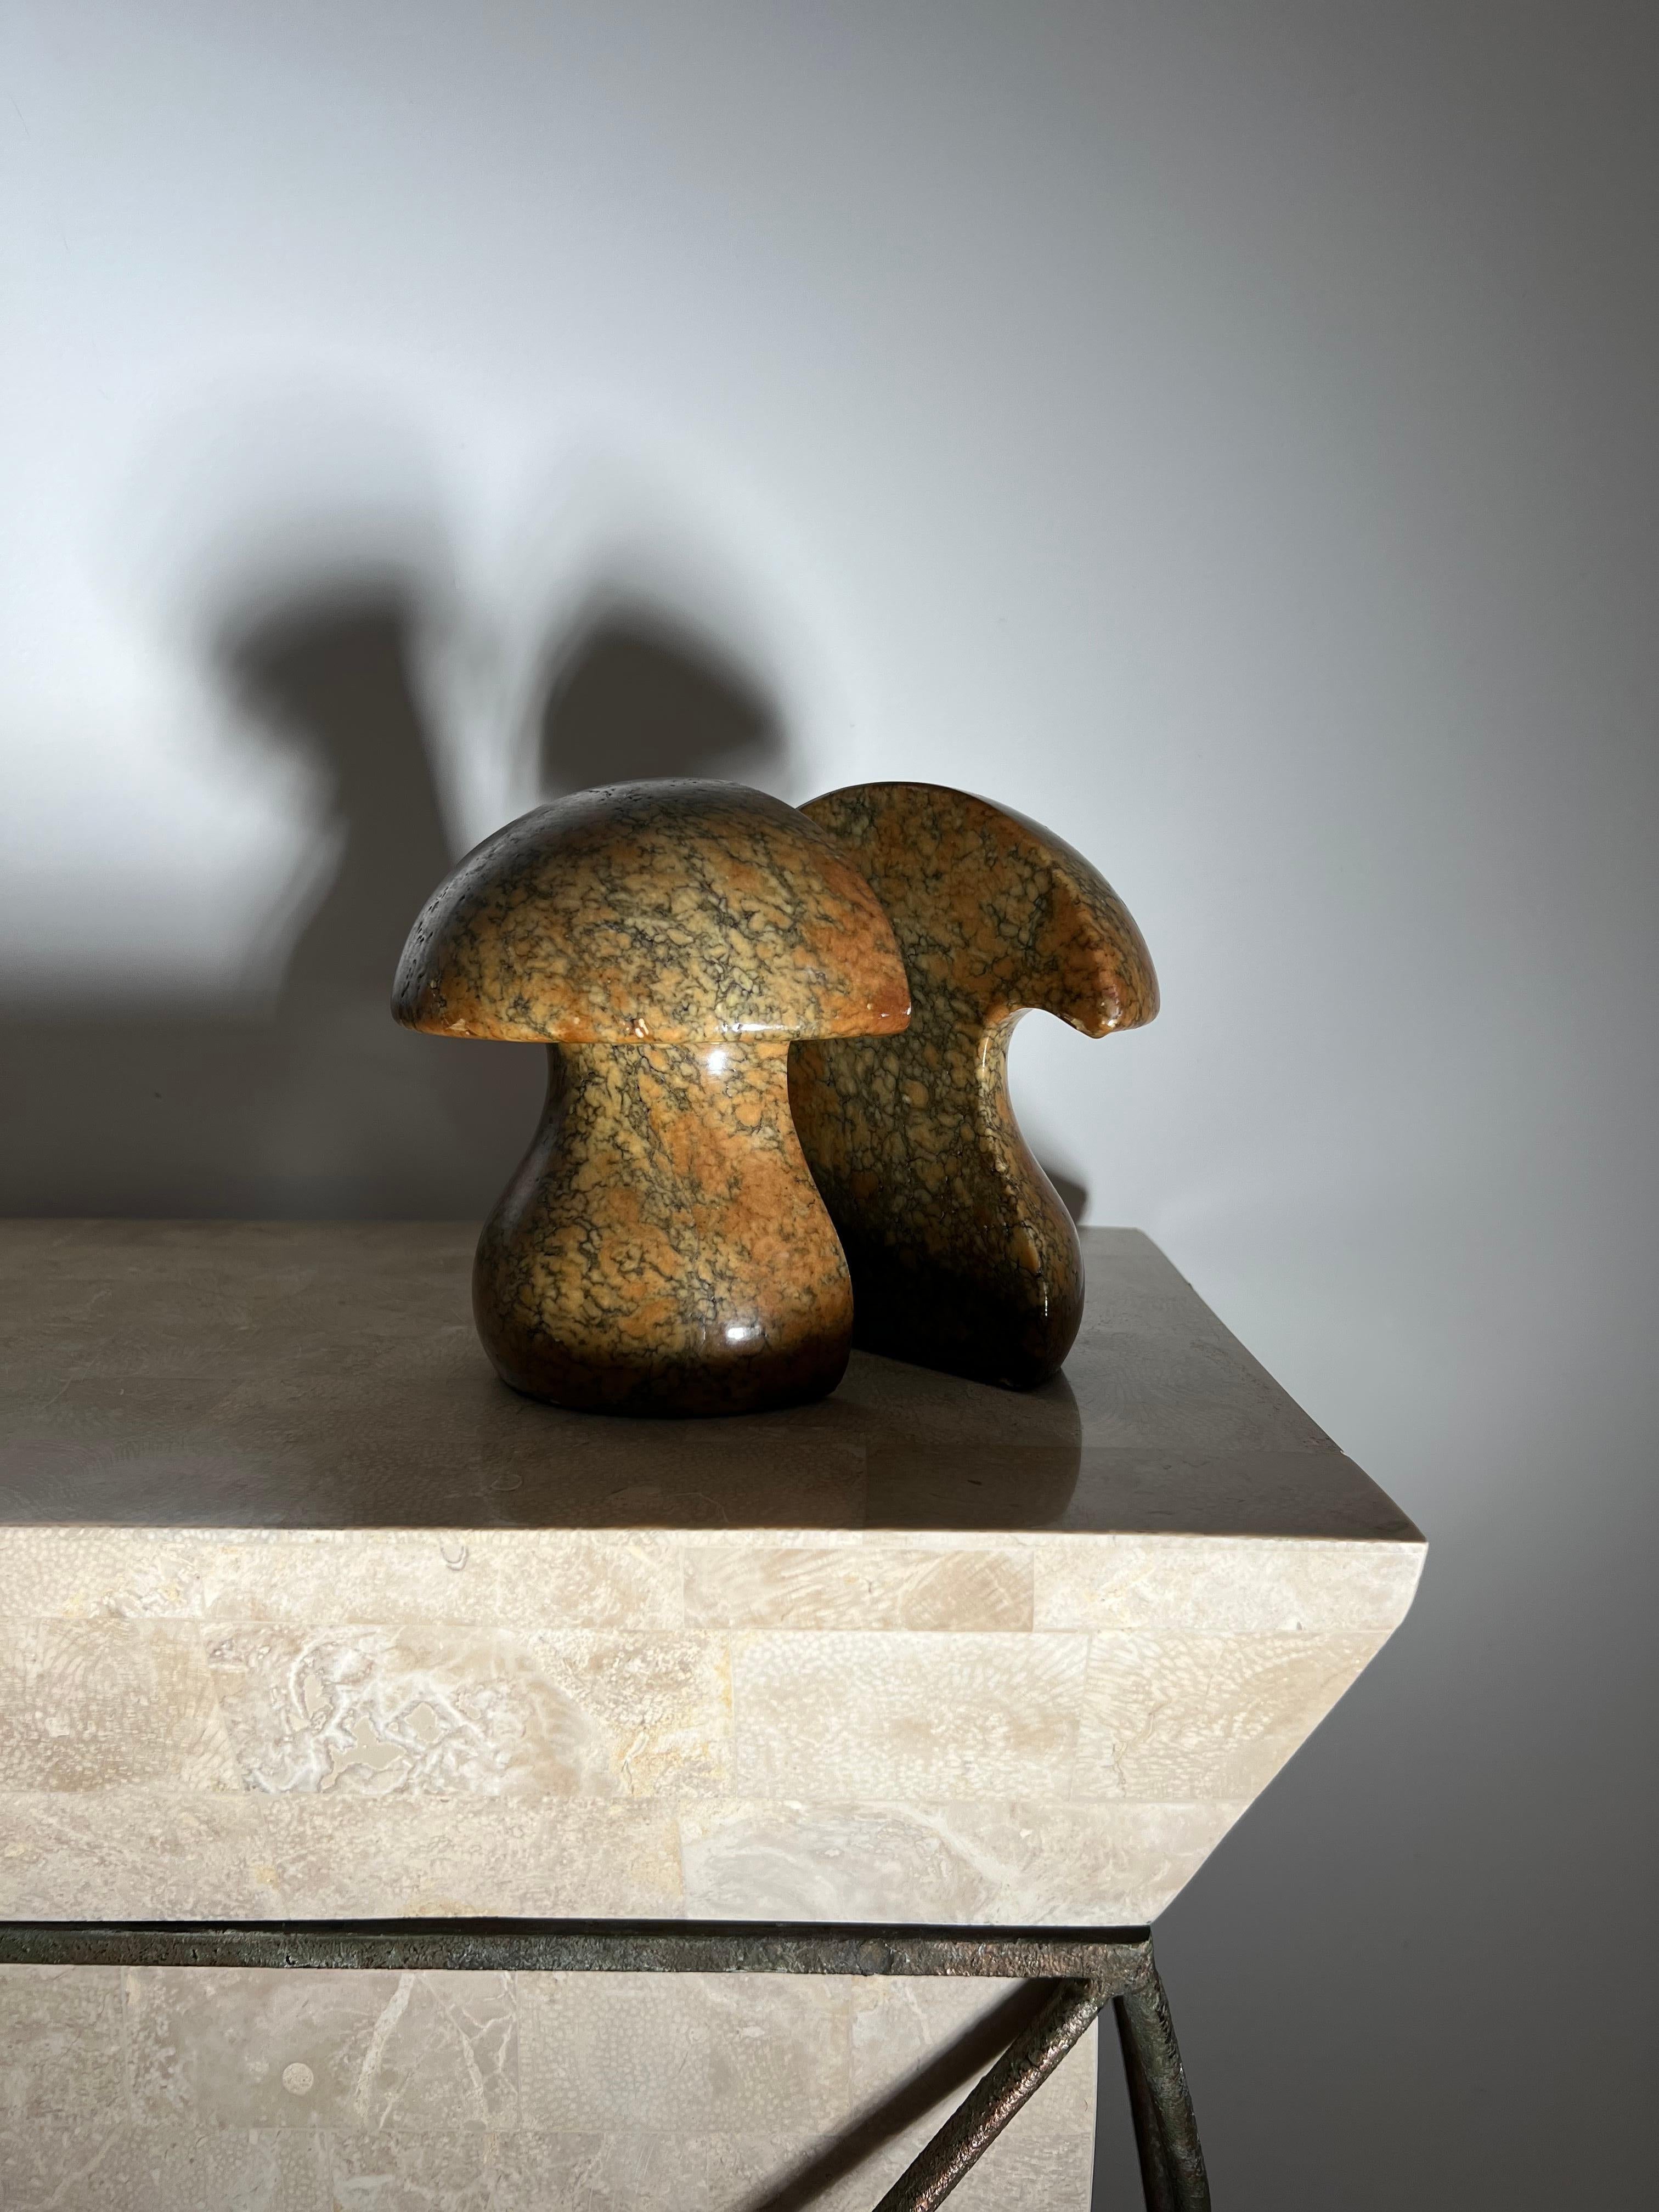 A pair of vintage Italian mid century modern mushroom marble bookends, circa 1960s. Hand-carved in Italy and featuring tones of caramel, pewter, and cognac. Felted bases. Some minor scuffs here and there but no significant damage or